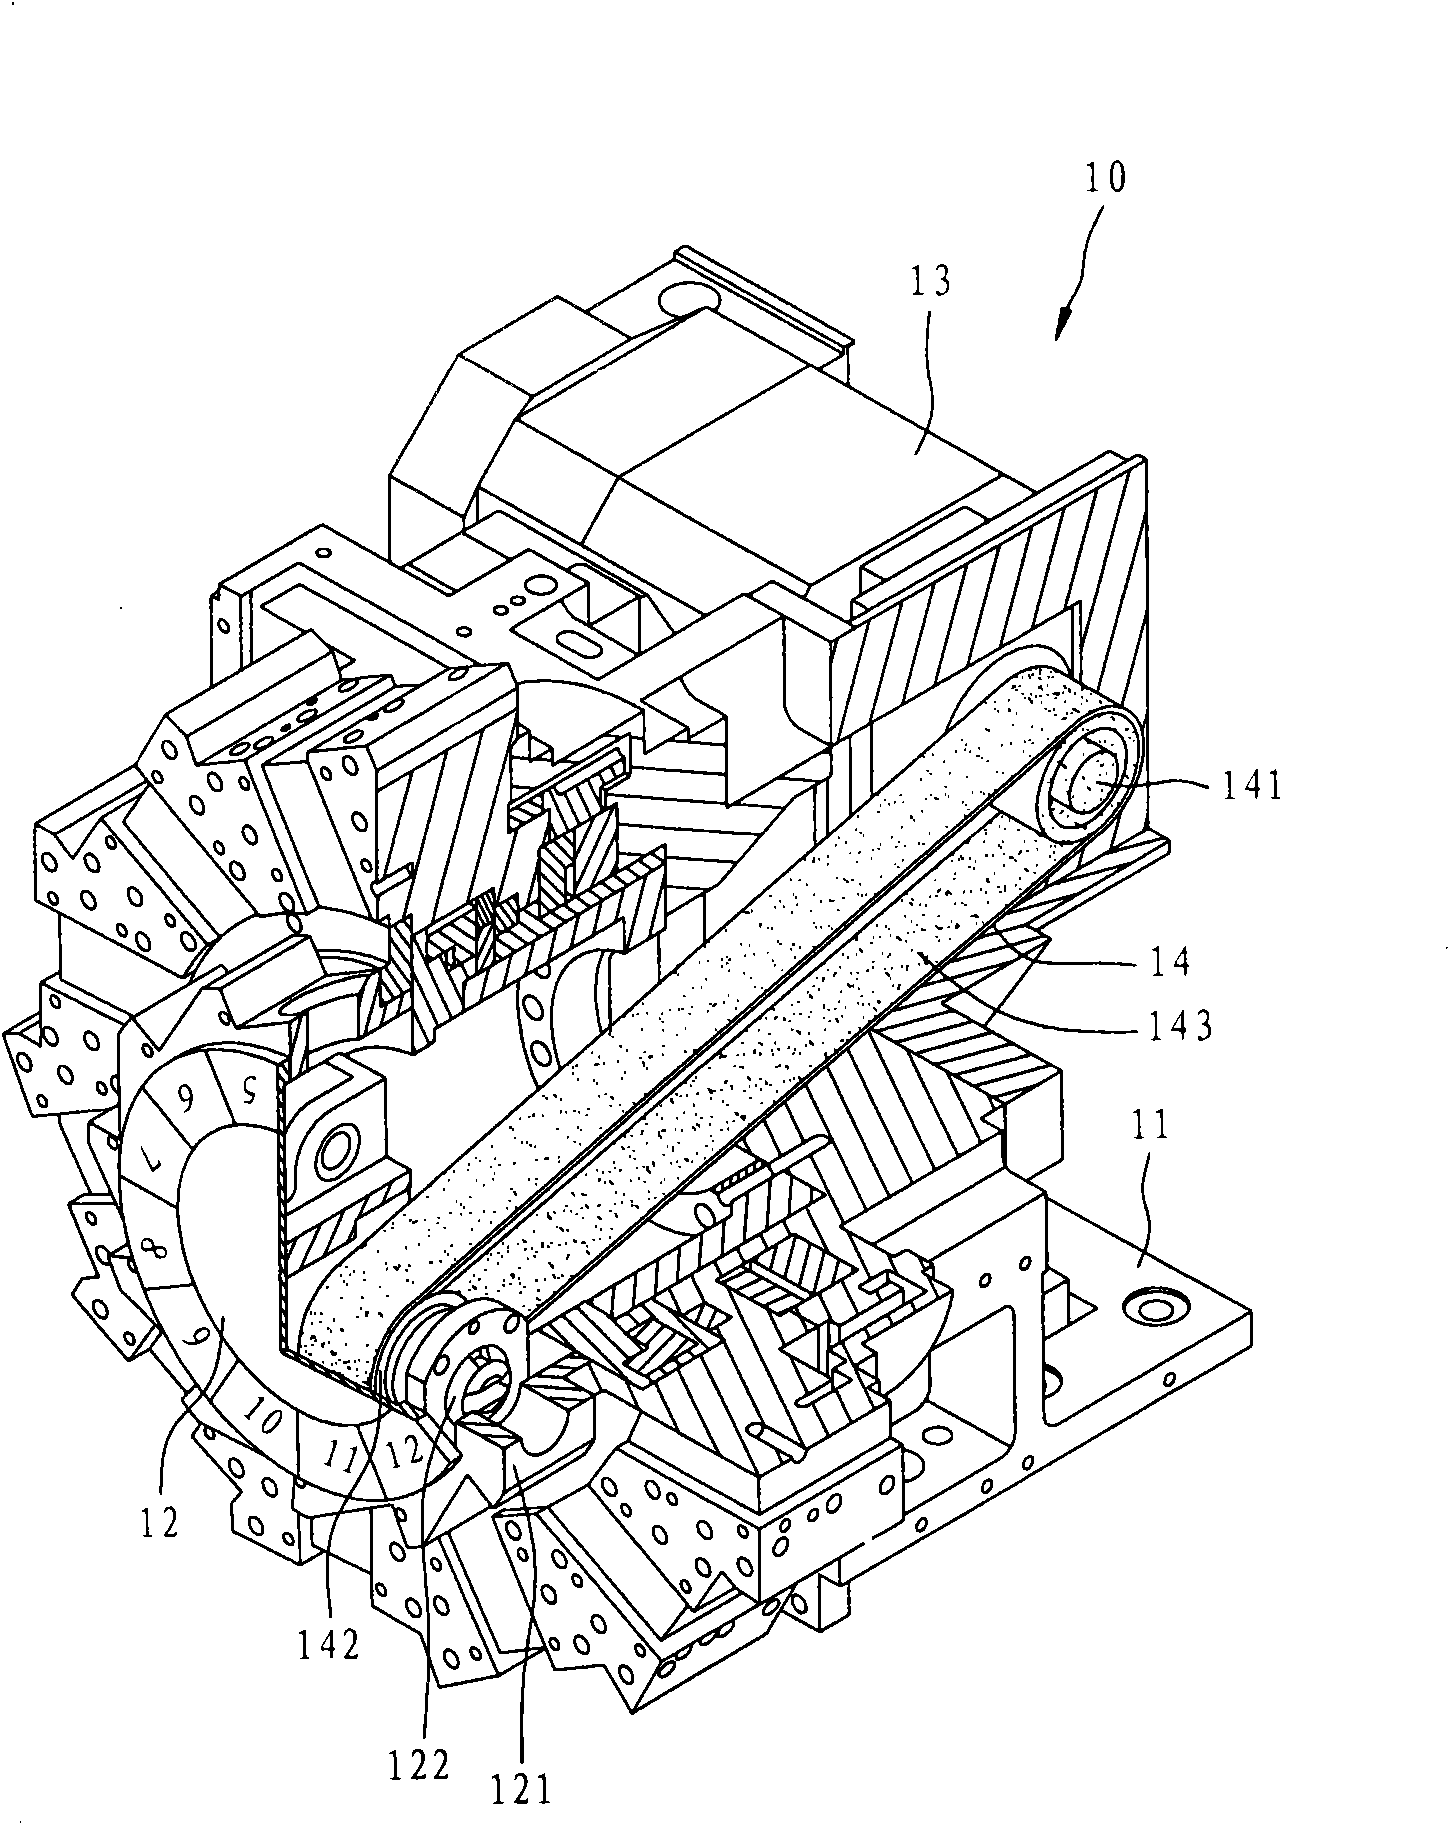 Multifunctional composite power cutter tower of computer numerically controlled lathe